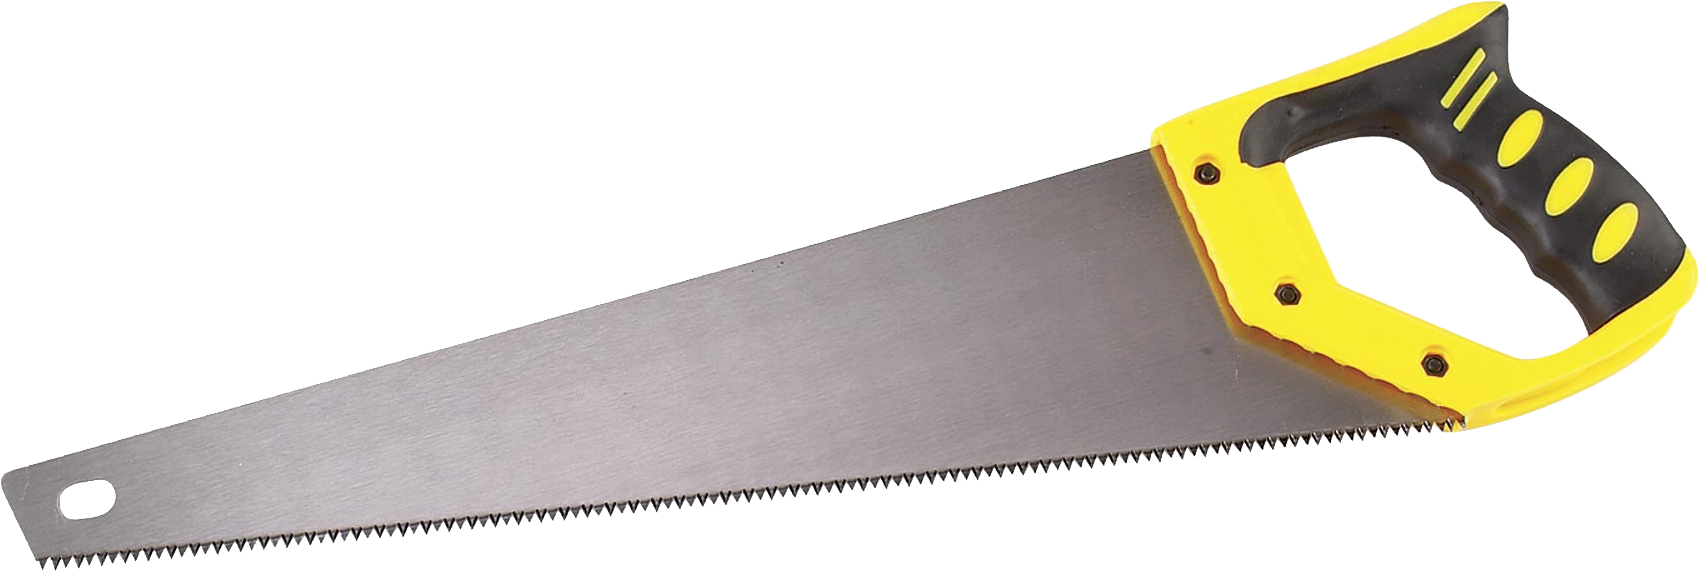 PNG File Name: Hand Saw PlusP